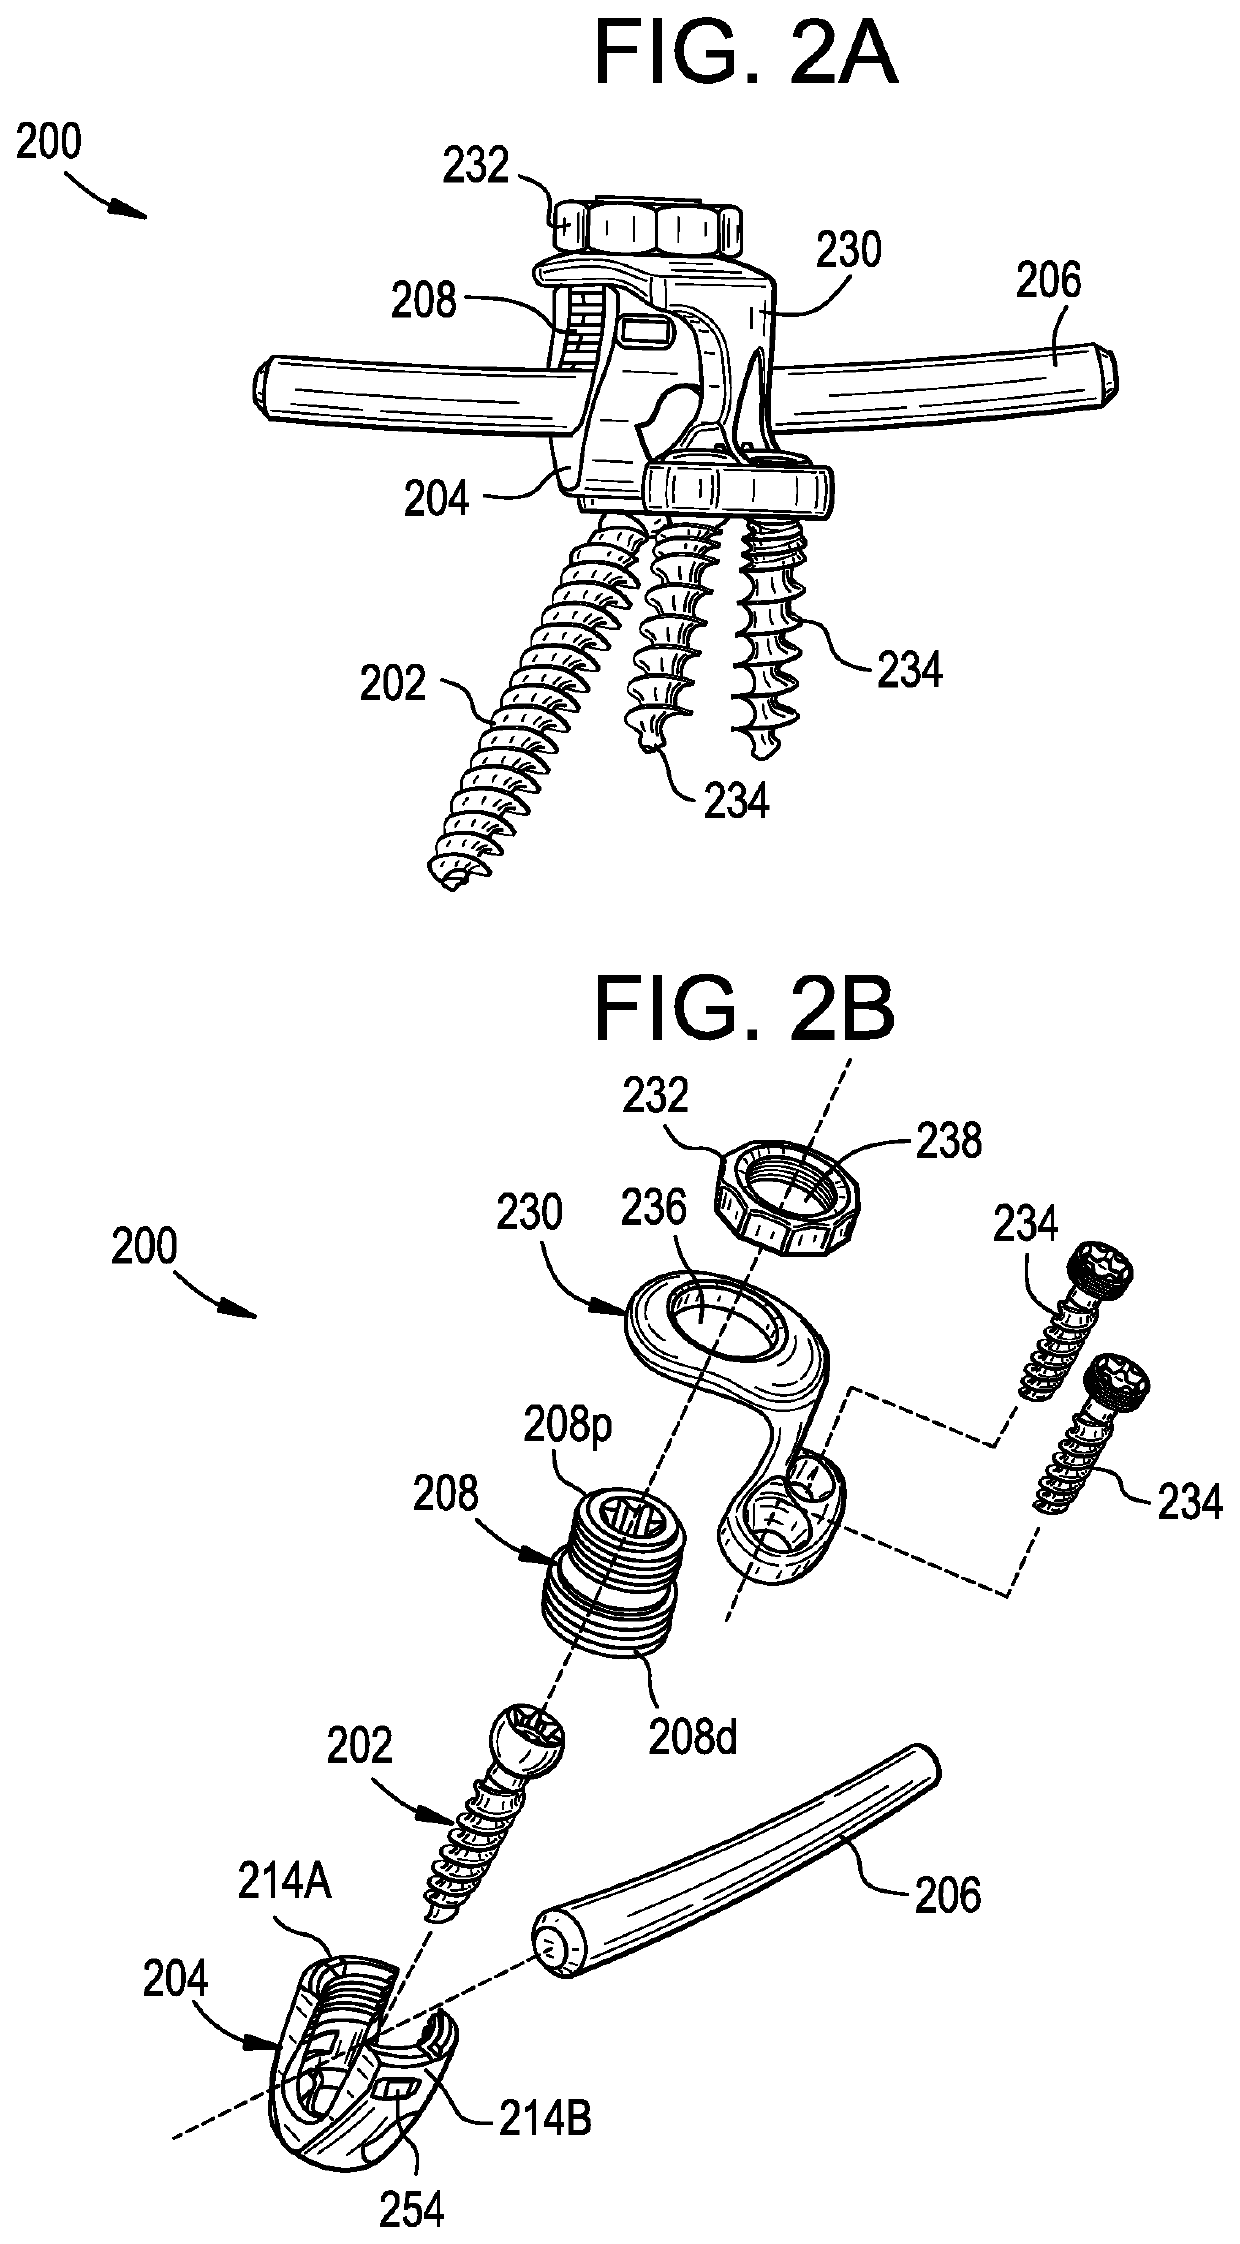 Multipoint fixation implants and related methods